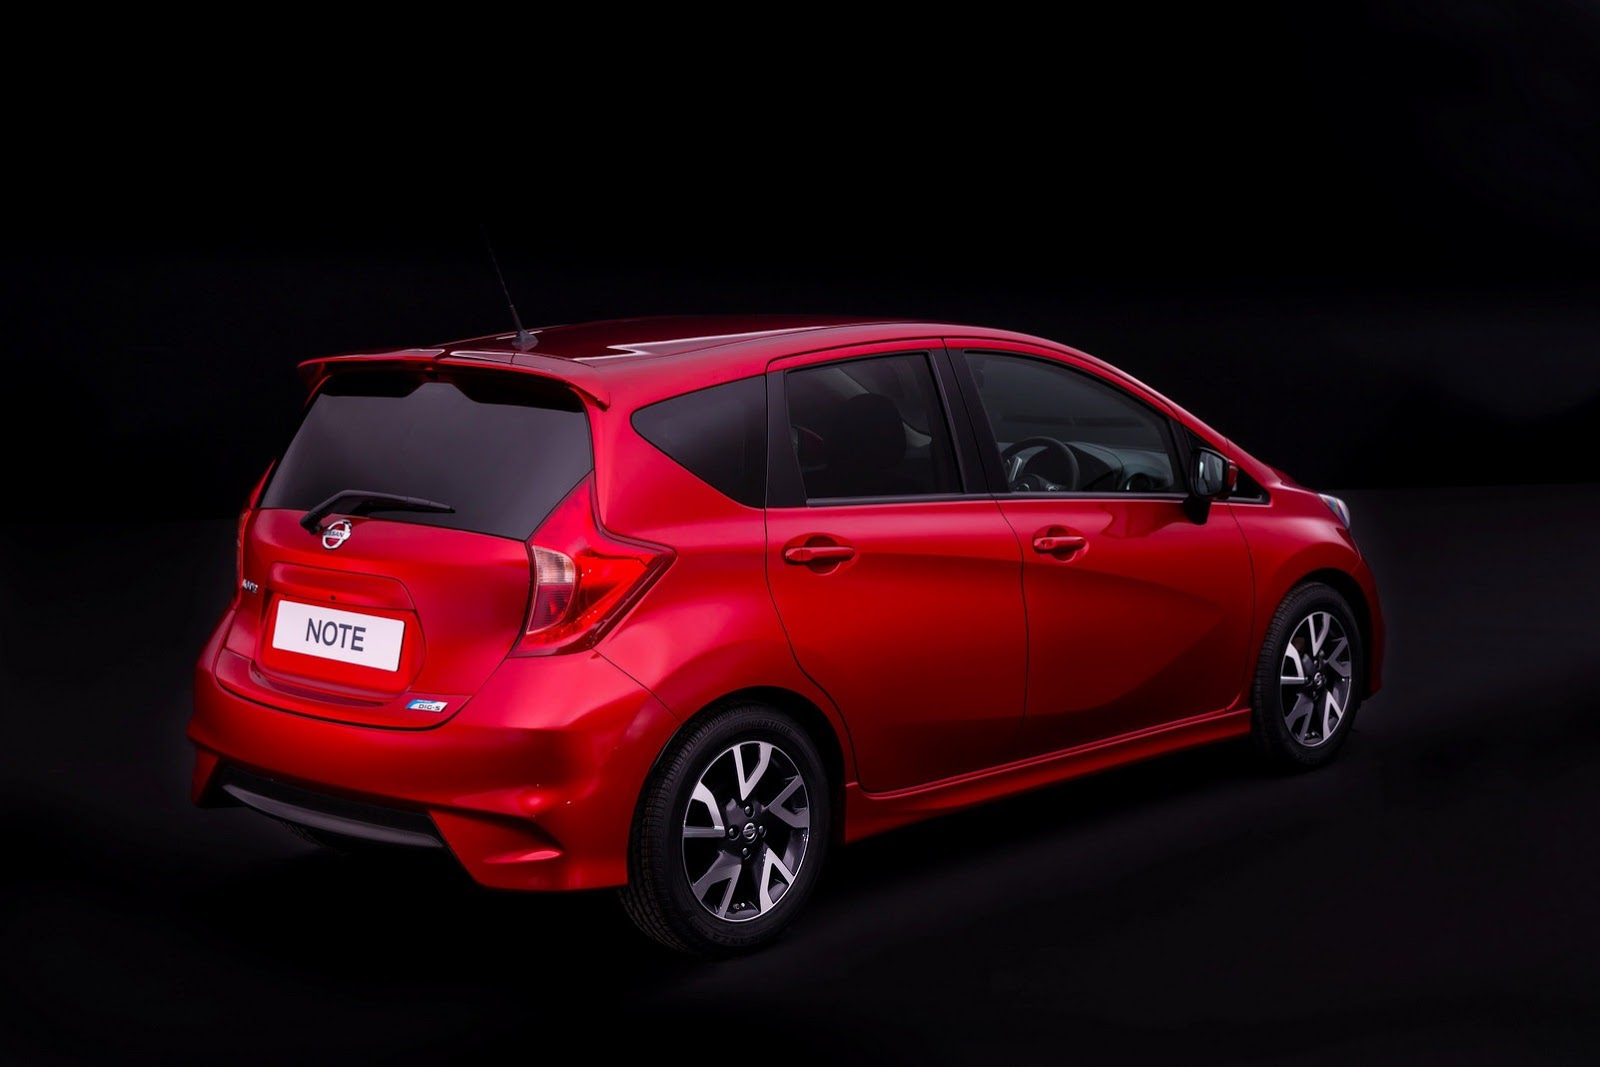 2014-Nissan-Note-6 | Flickr - Photo Sharing!